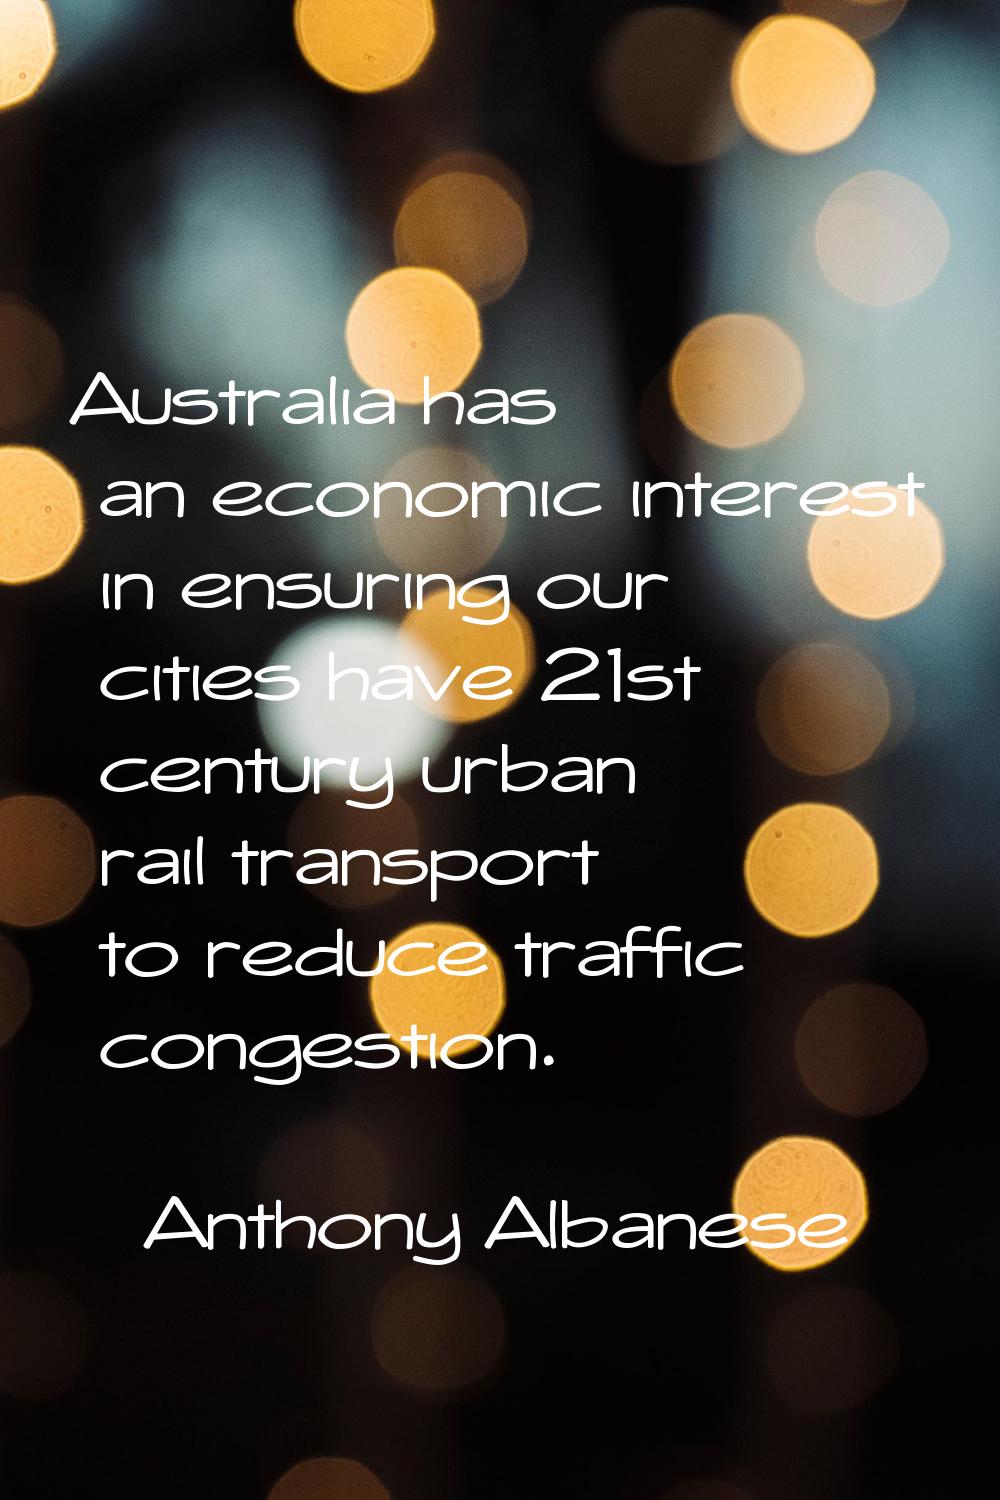 Australia has an economic interest in ensuring our cities have 21st century urban rail transport to